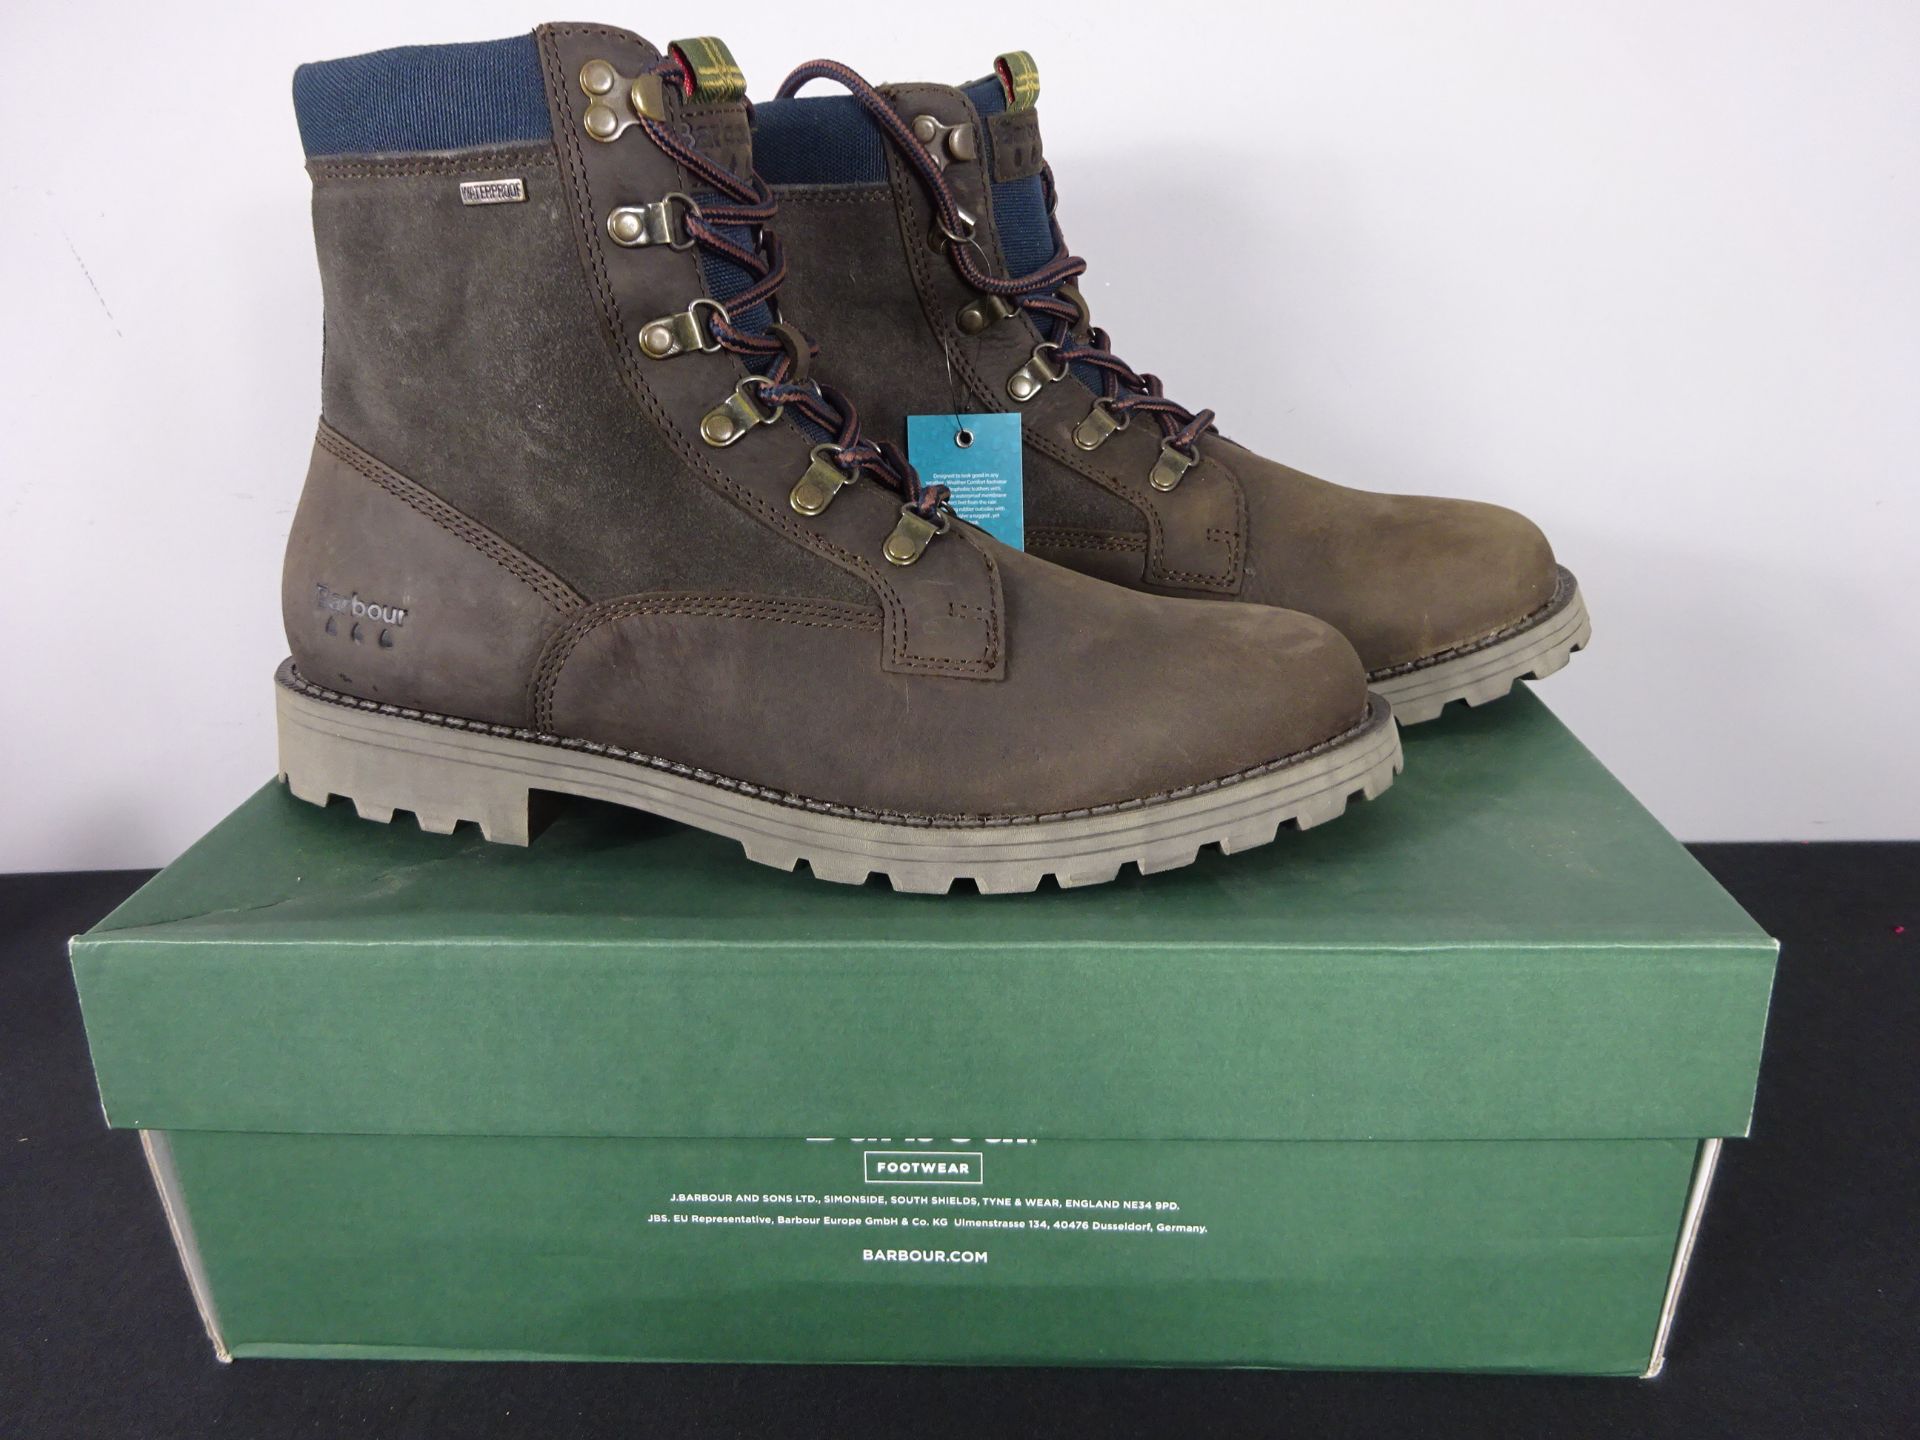 RRP £129.99 - New Barbour Chiltern Boots - Size 6.